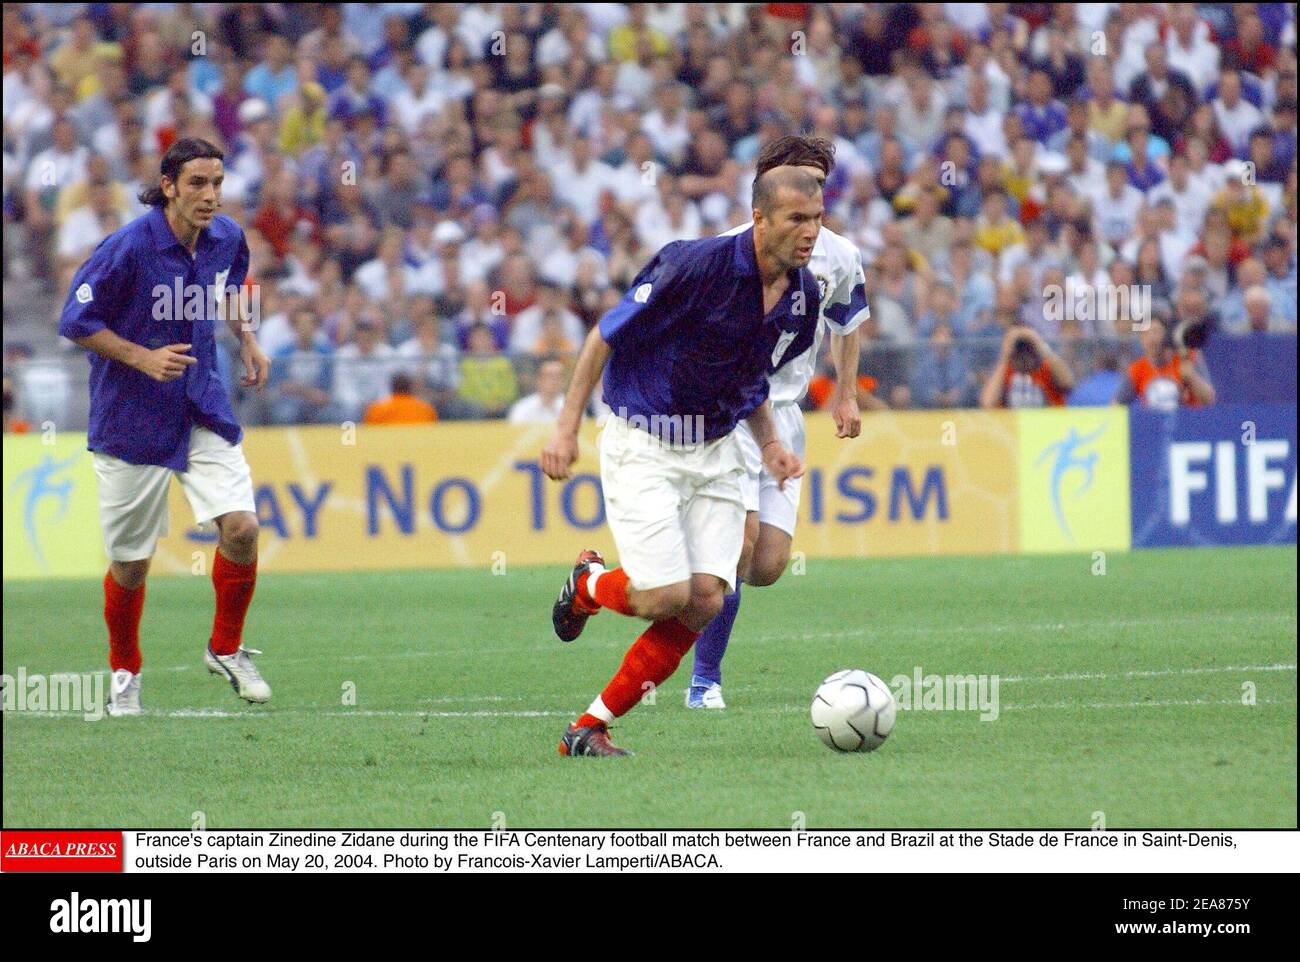 France's captain Zinedine Zidane during the FIFA Centenary football match between France and Brazil at the Stade de France in Saint-Denis, outside Paris on May 20, 2004. Photo by Francois-Xavier Lamperti/ABACA. Stock Photo